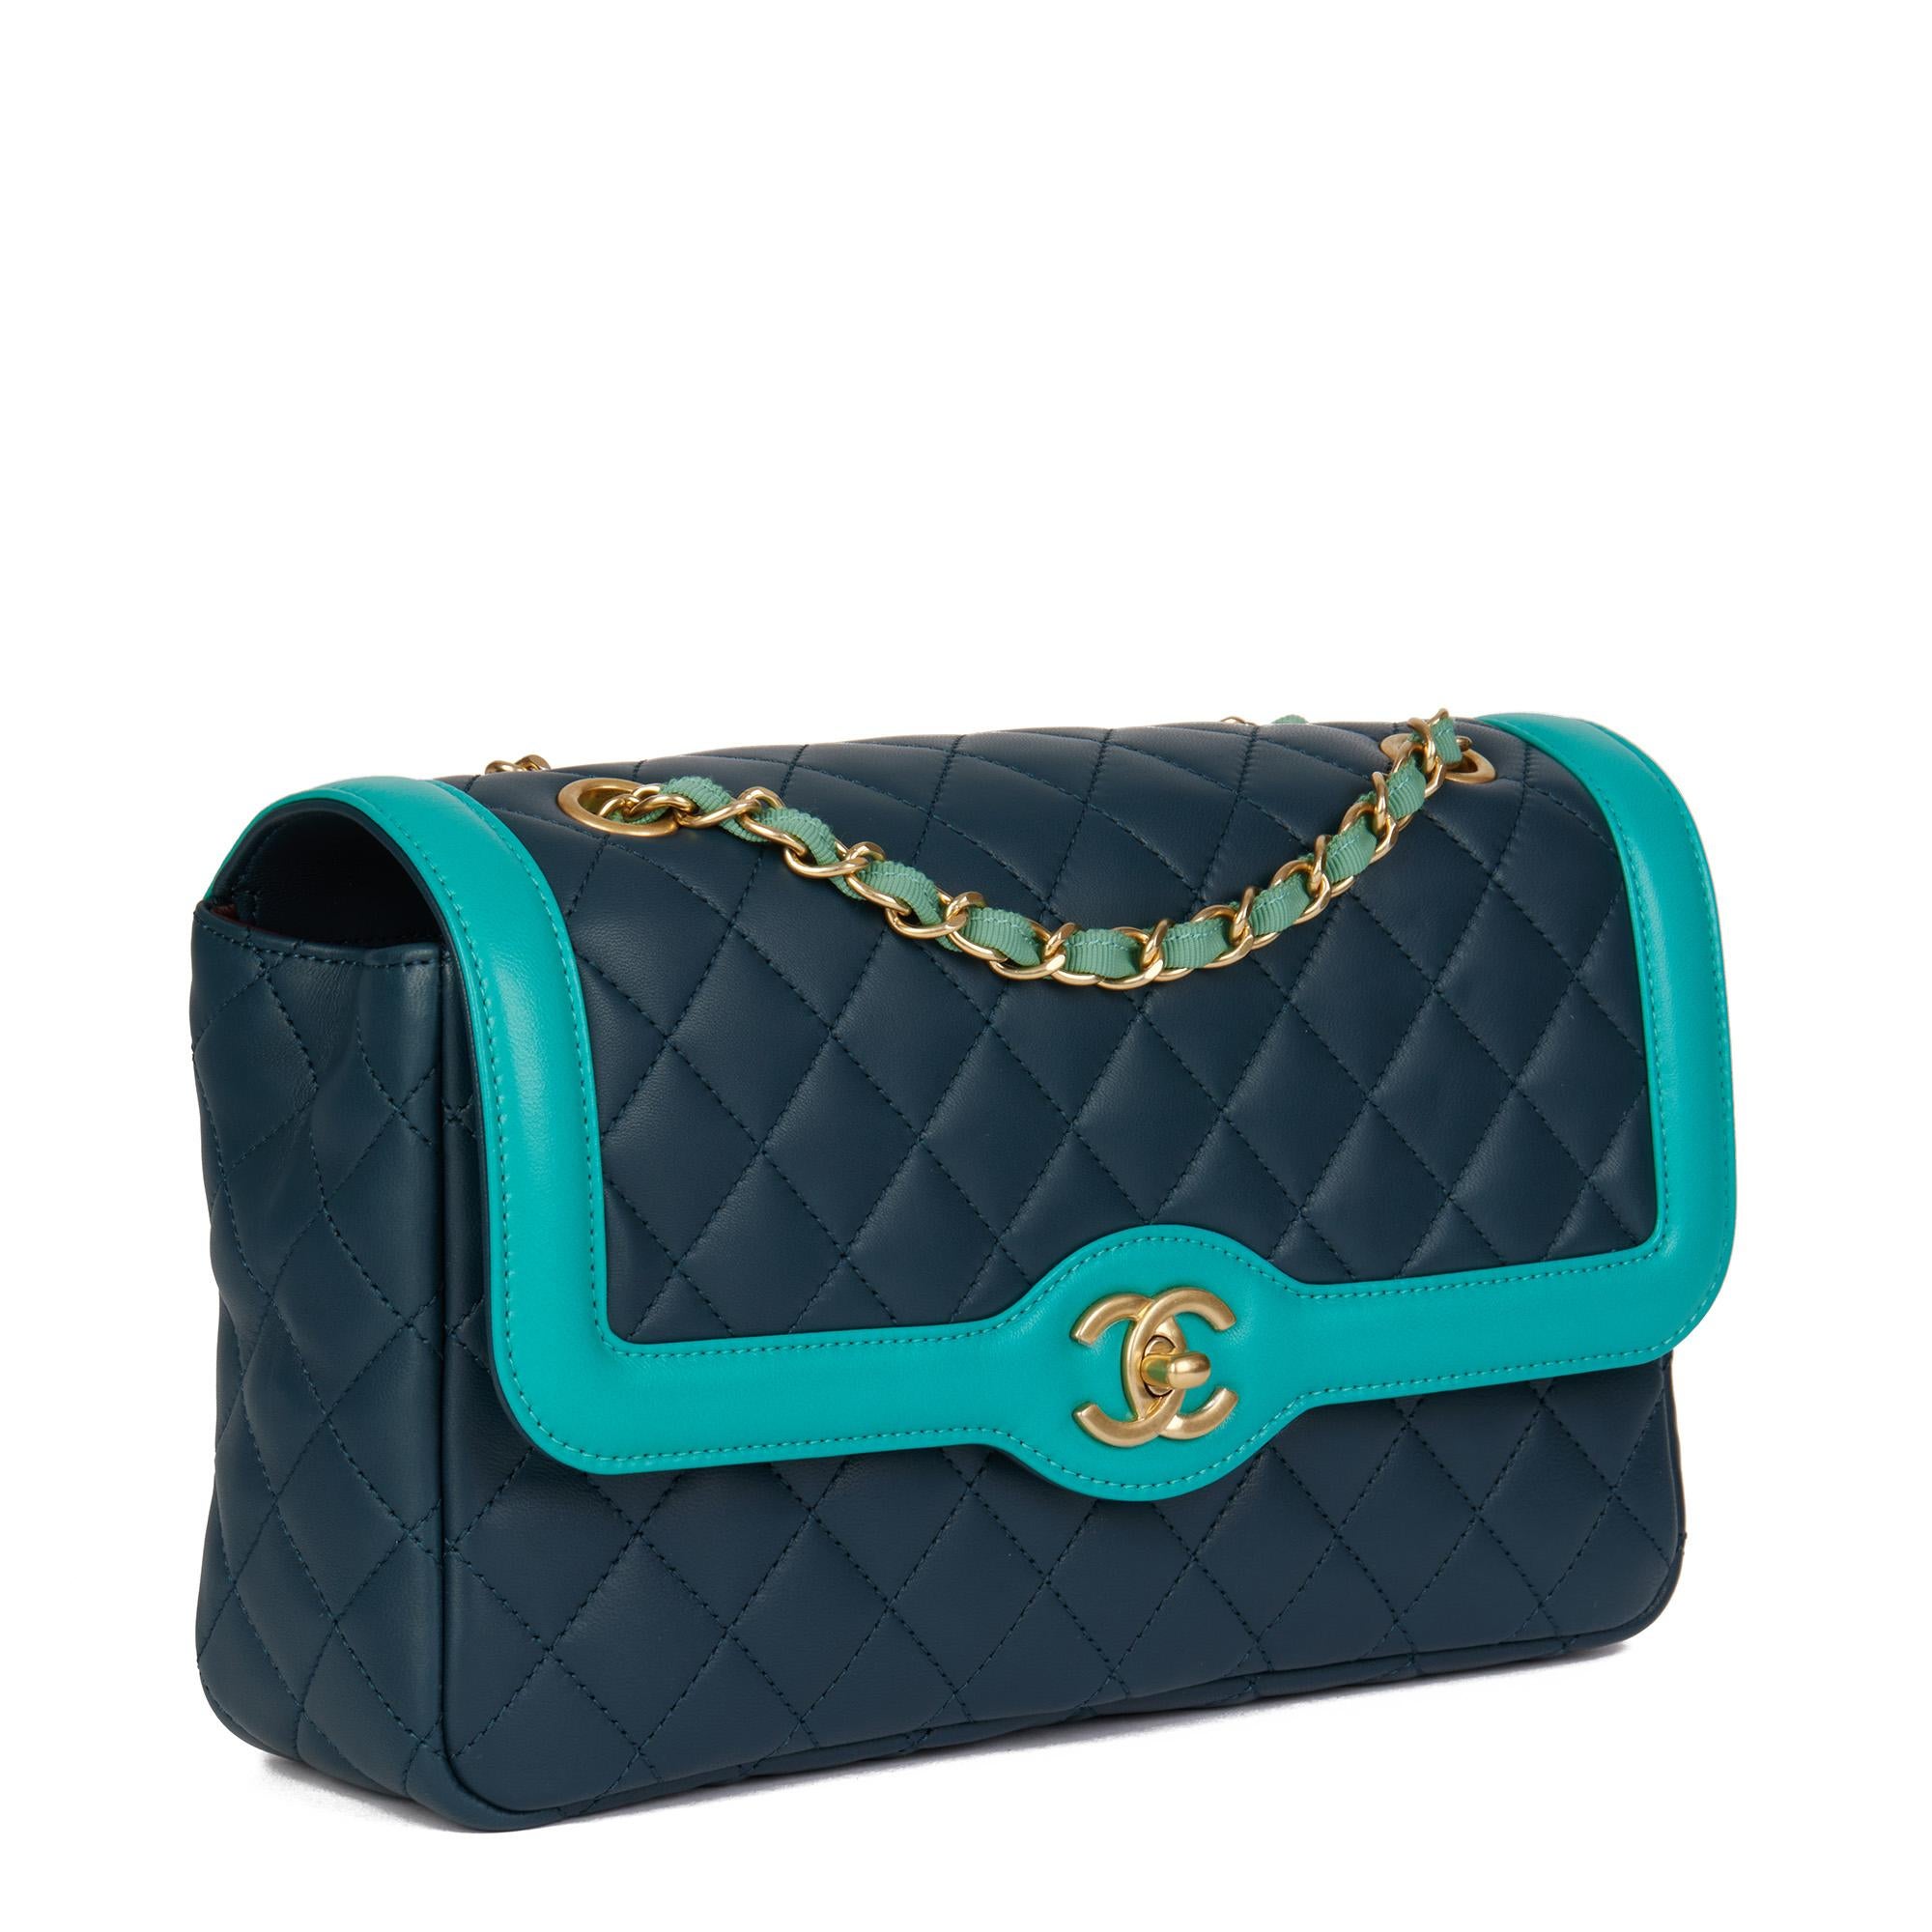 CHANEL
Navy & Turquoise Quilted Lambskin Medium Classic Single Flap Bag

Xupes Reference: HB4513
Serial Number: 23754630
Age (Circa): 2017
Accompanied By: Chanel Dust Bag, Box, Care Booklet, Authenticity Card
Authenticity Details: Authenticity Card,